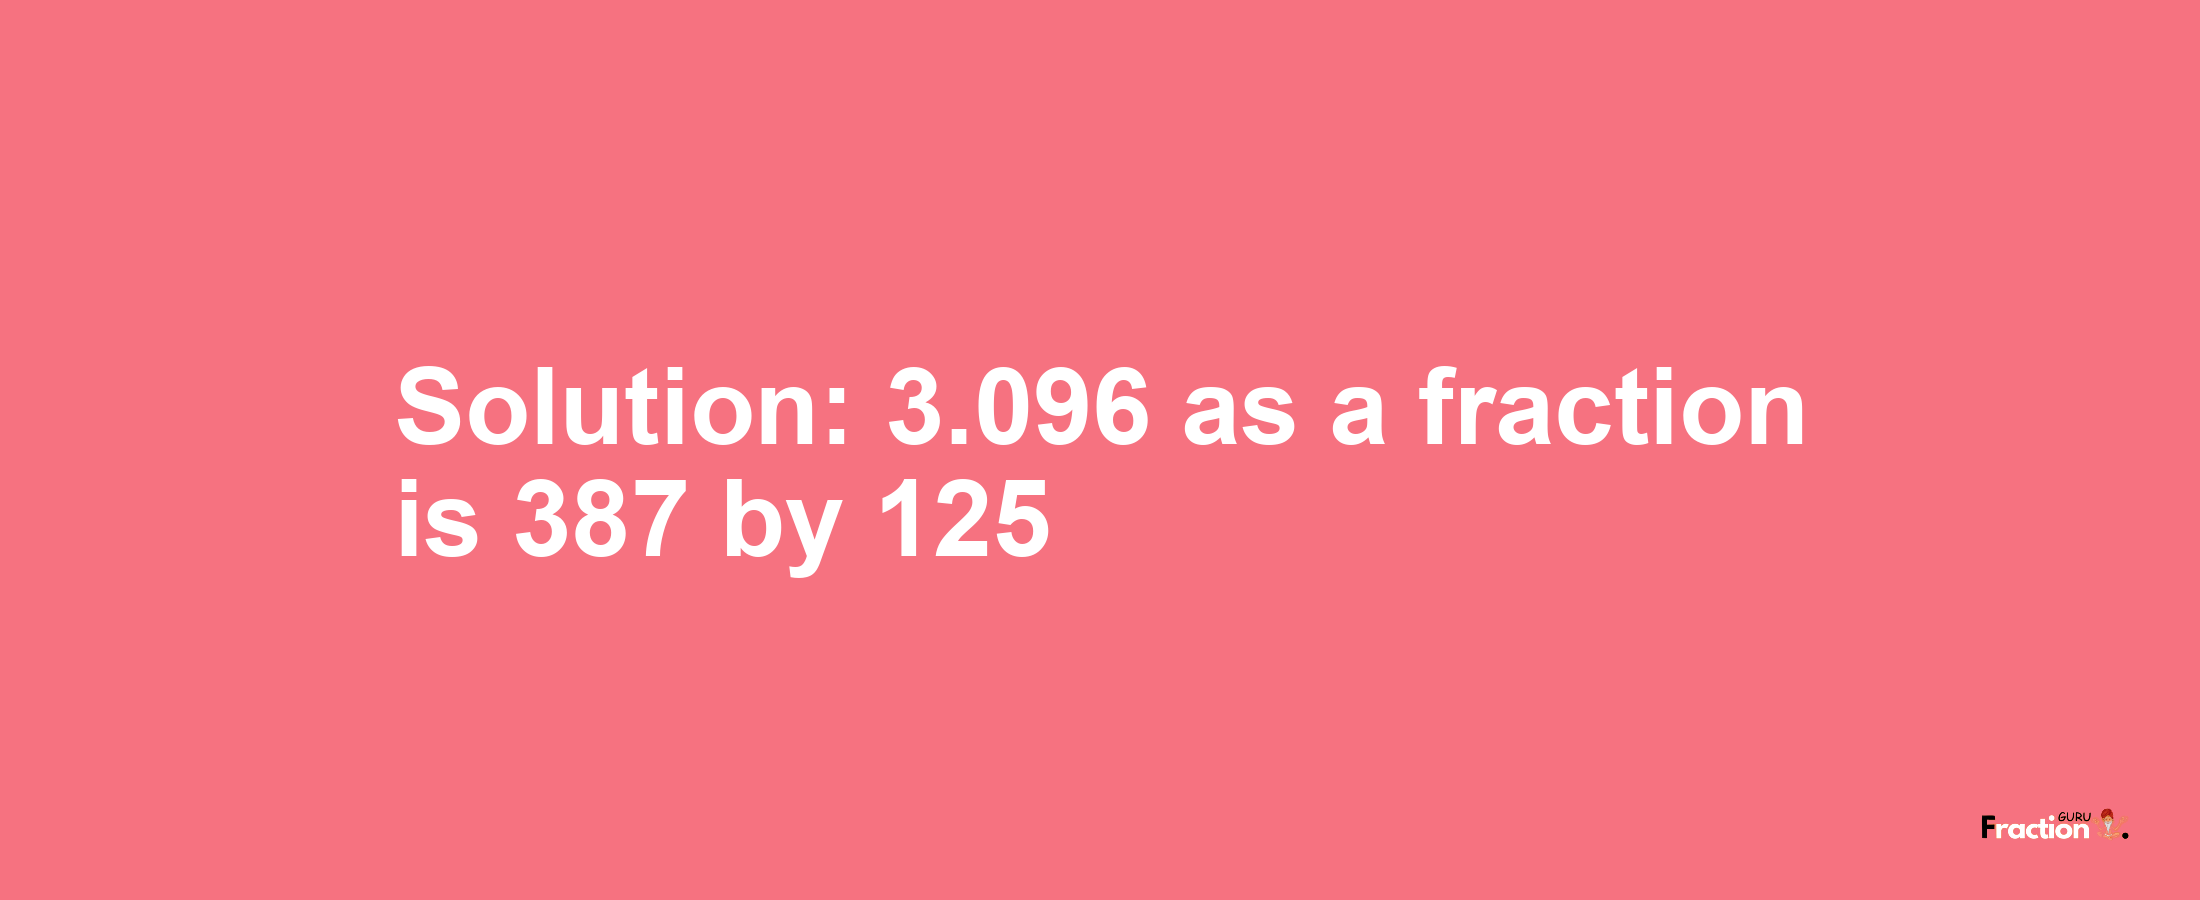 Solution:3.096 as a fraction is 387/125